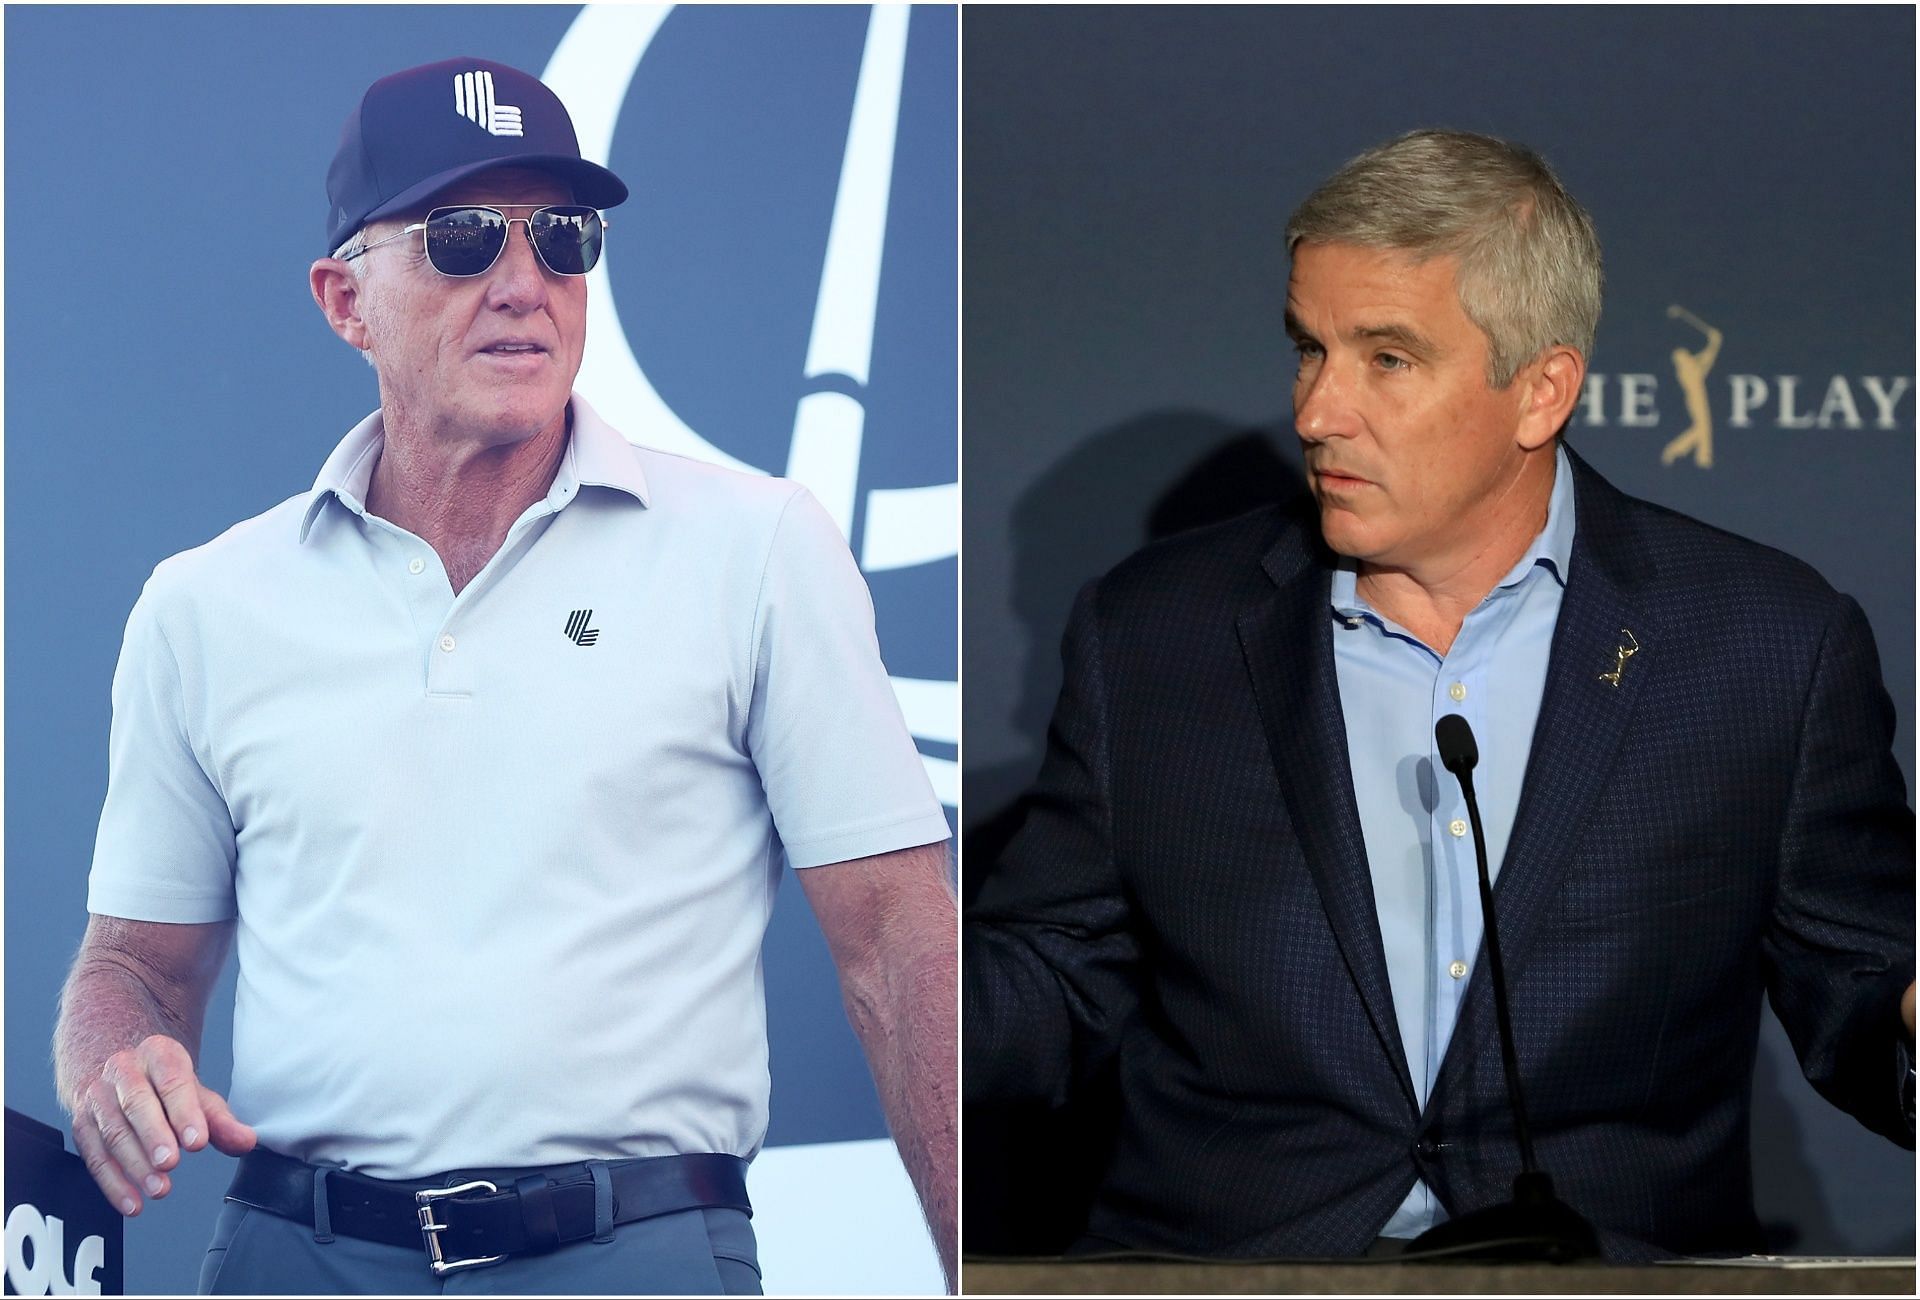 LIV Golf CEO Greg Norman and PGA Tour Commissioner Jay Monahan (via Getty Images)